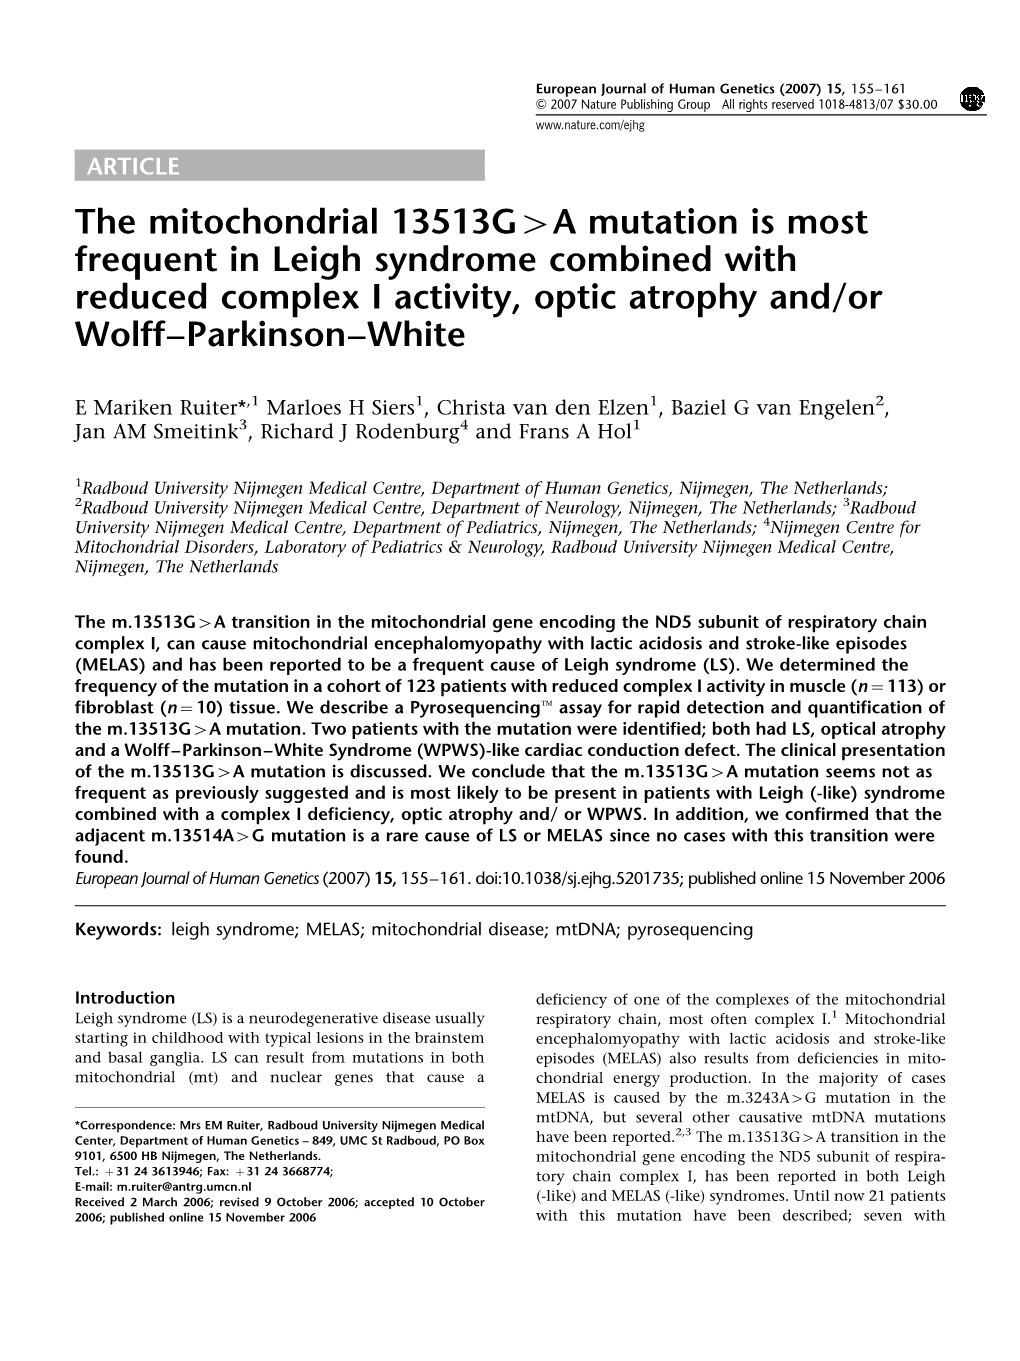 The Mitochondrial 13513G&gt;A Mutation Is Most Frequent in Leigh